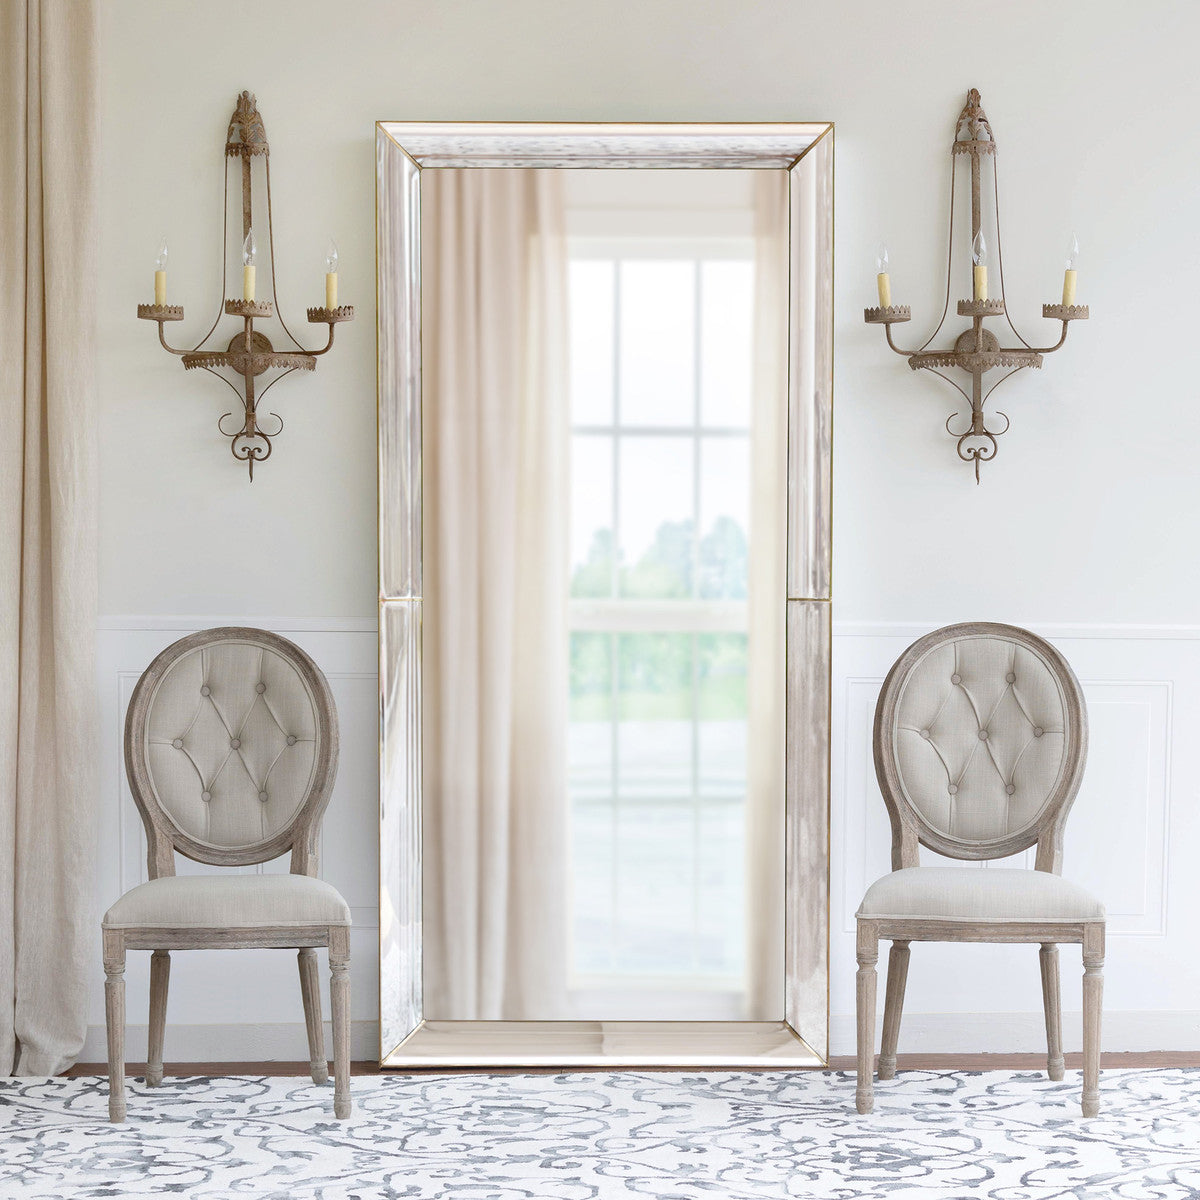 floor mirror elegant sconces chairs and rug